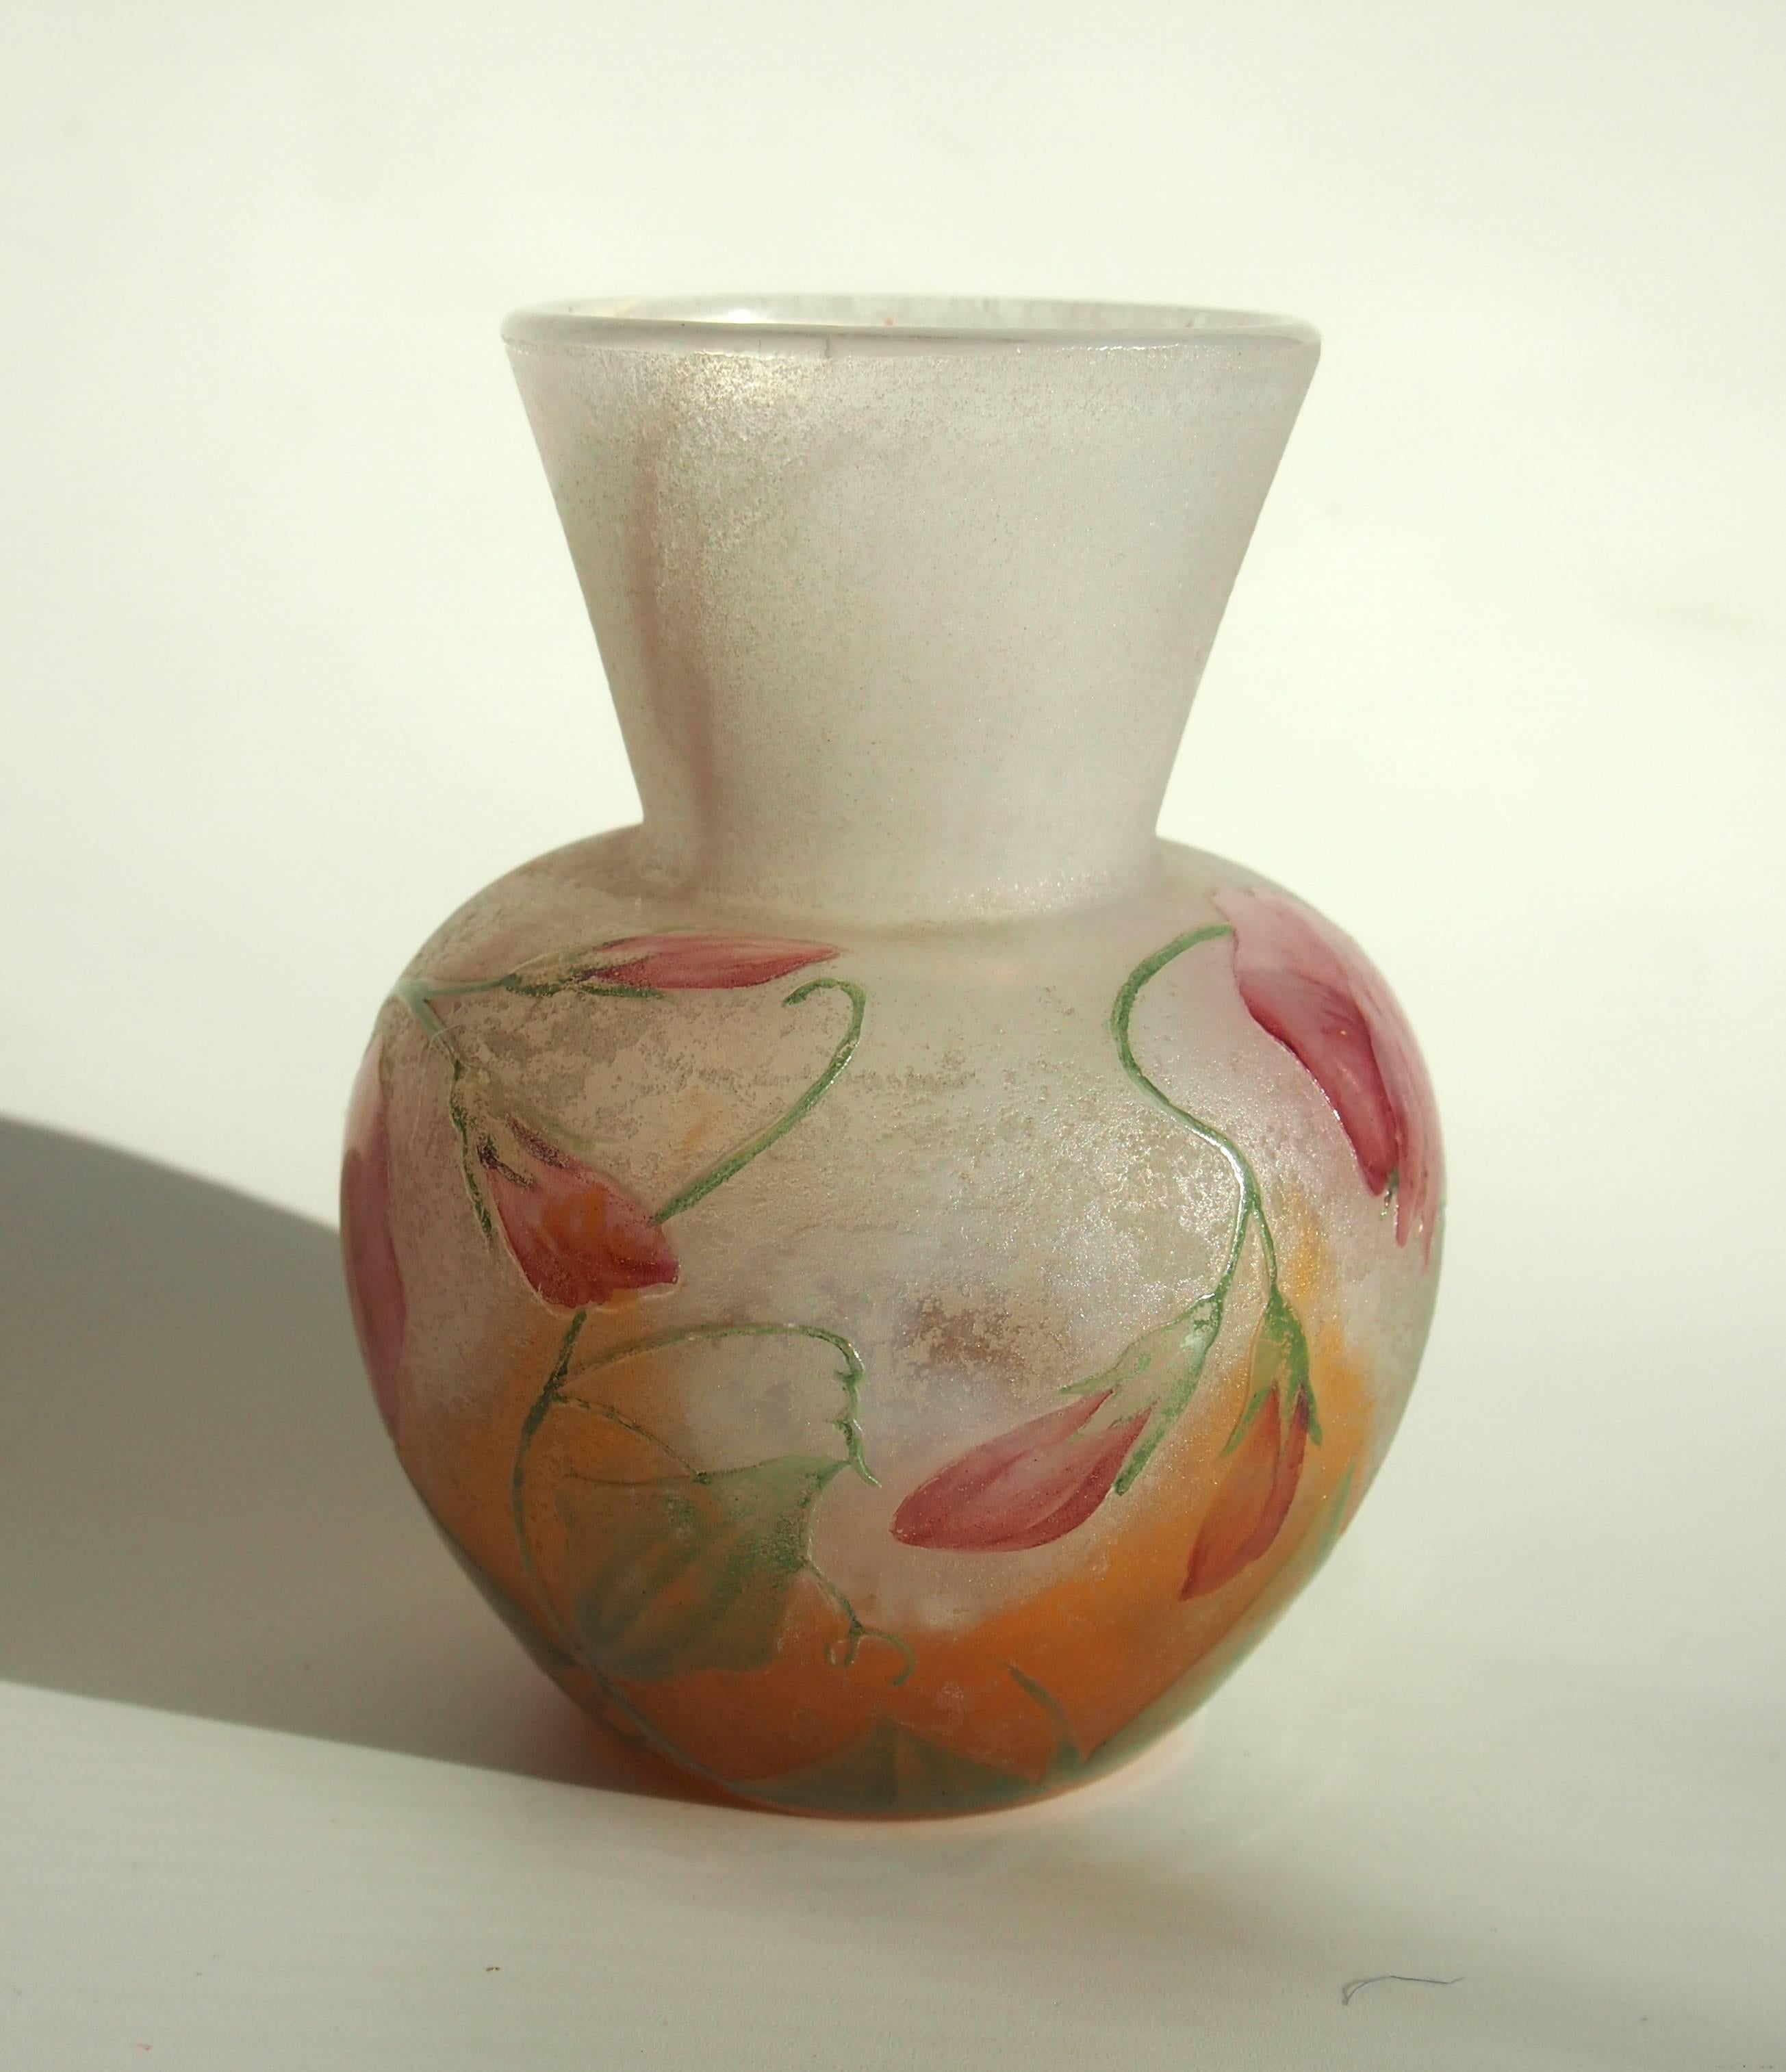 Cute small Daum enamel and cameo sweet pea vase, in orange and white glass enameled with pink and green sweet peas, signed in cameo (just visible picture 5 'Daum Nancy' in a triangle like shape) -also initialed B.S. to the base in green for the